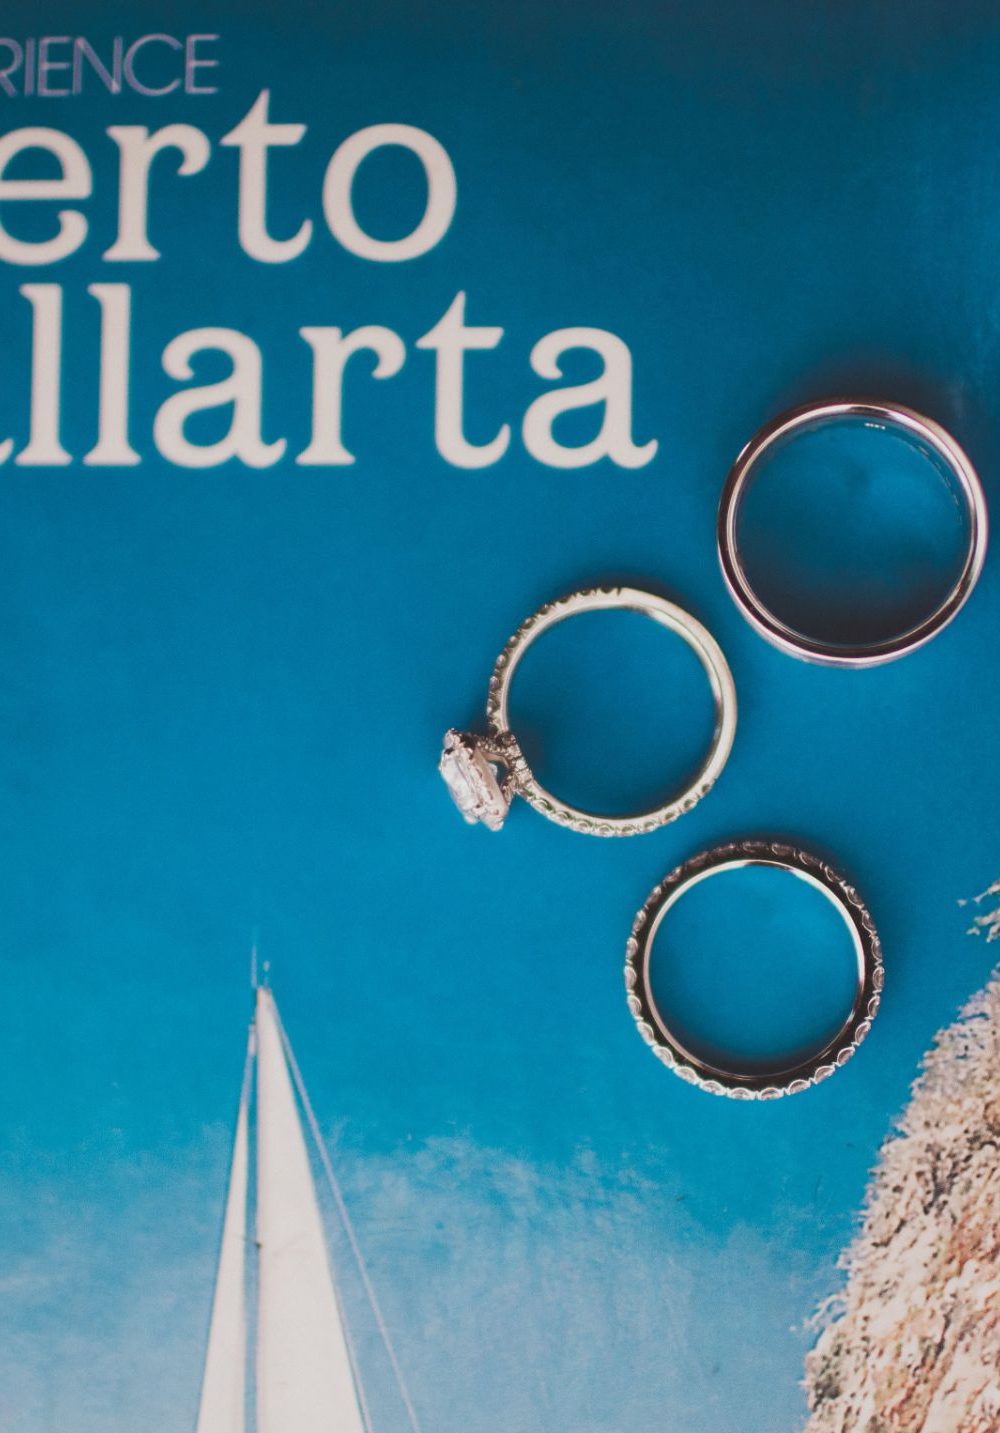 The wedding rings are set on a Puerto Vallarta tourism book for a creative photo at this destination wedding